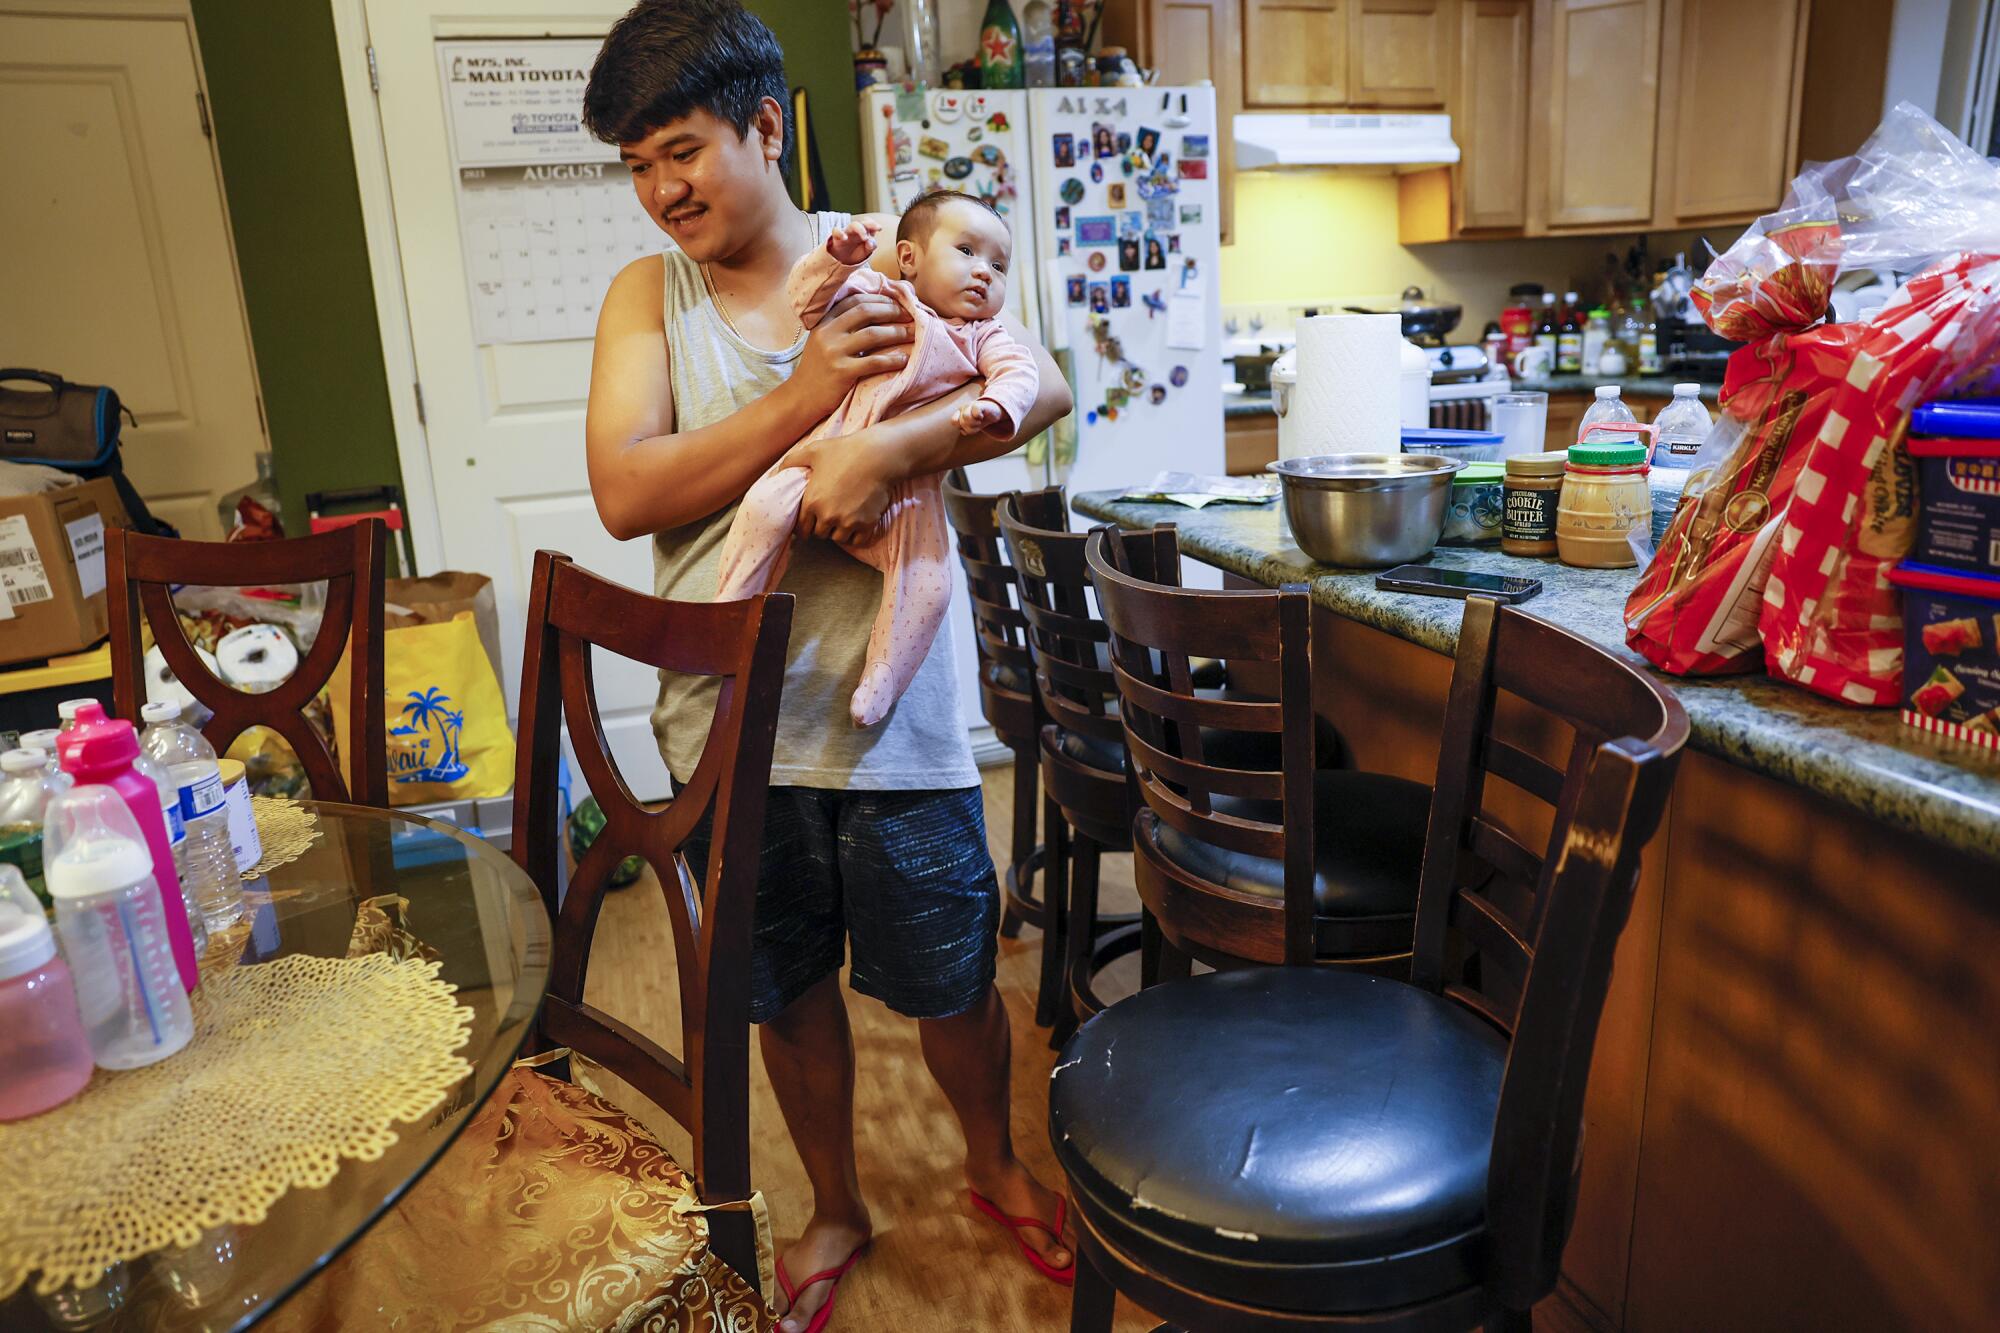 A man in a sleeveless shirt and shorts holds a baby in a pink outfit while standing near a dining table and chairs 